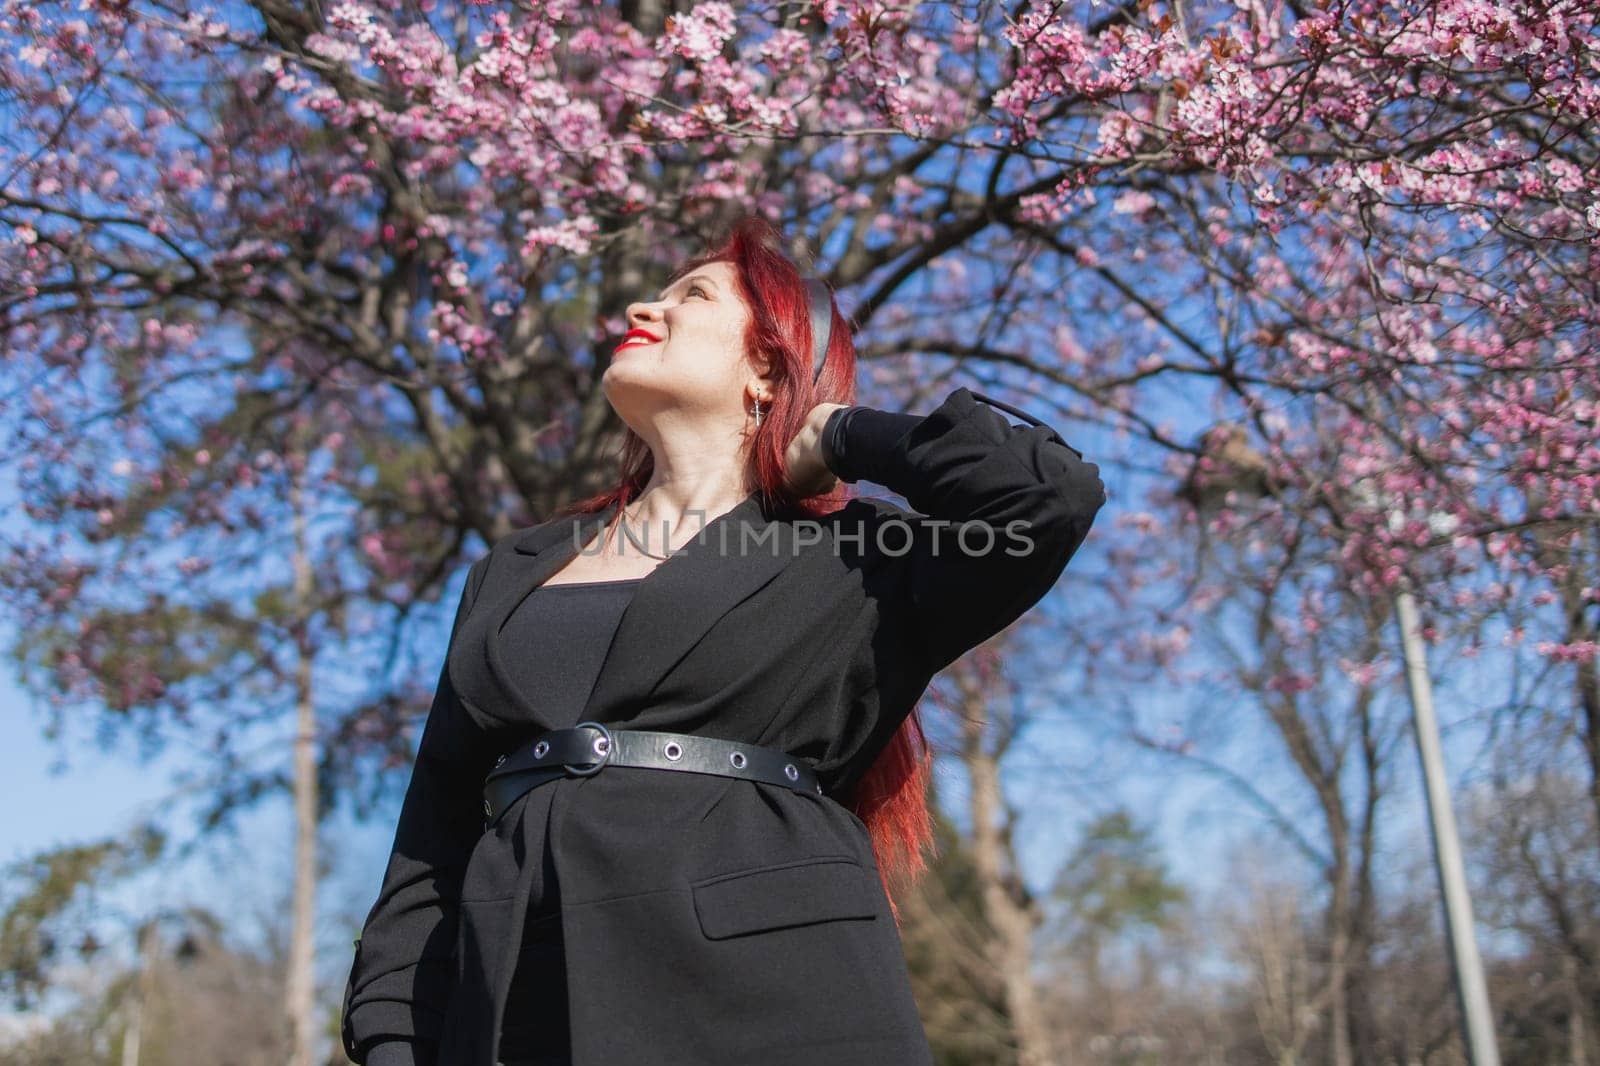 Woman with cherry flowers surrounded by blossoming trees copy space. Beauty and seasonal change and spring bloom season concept